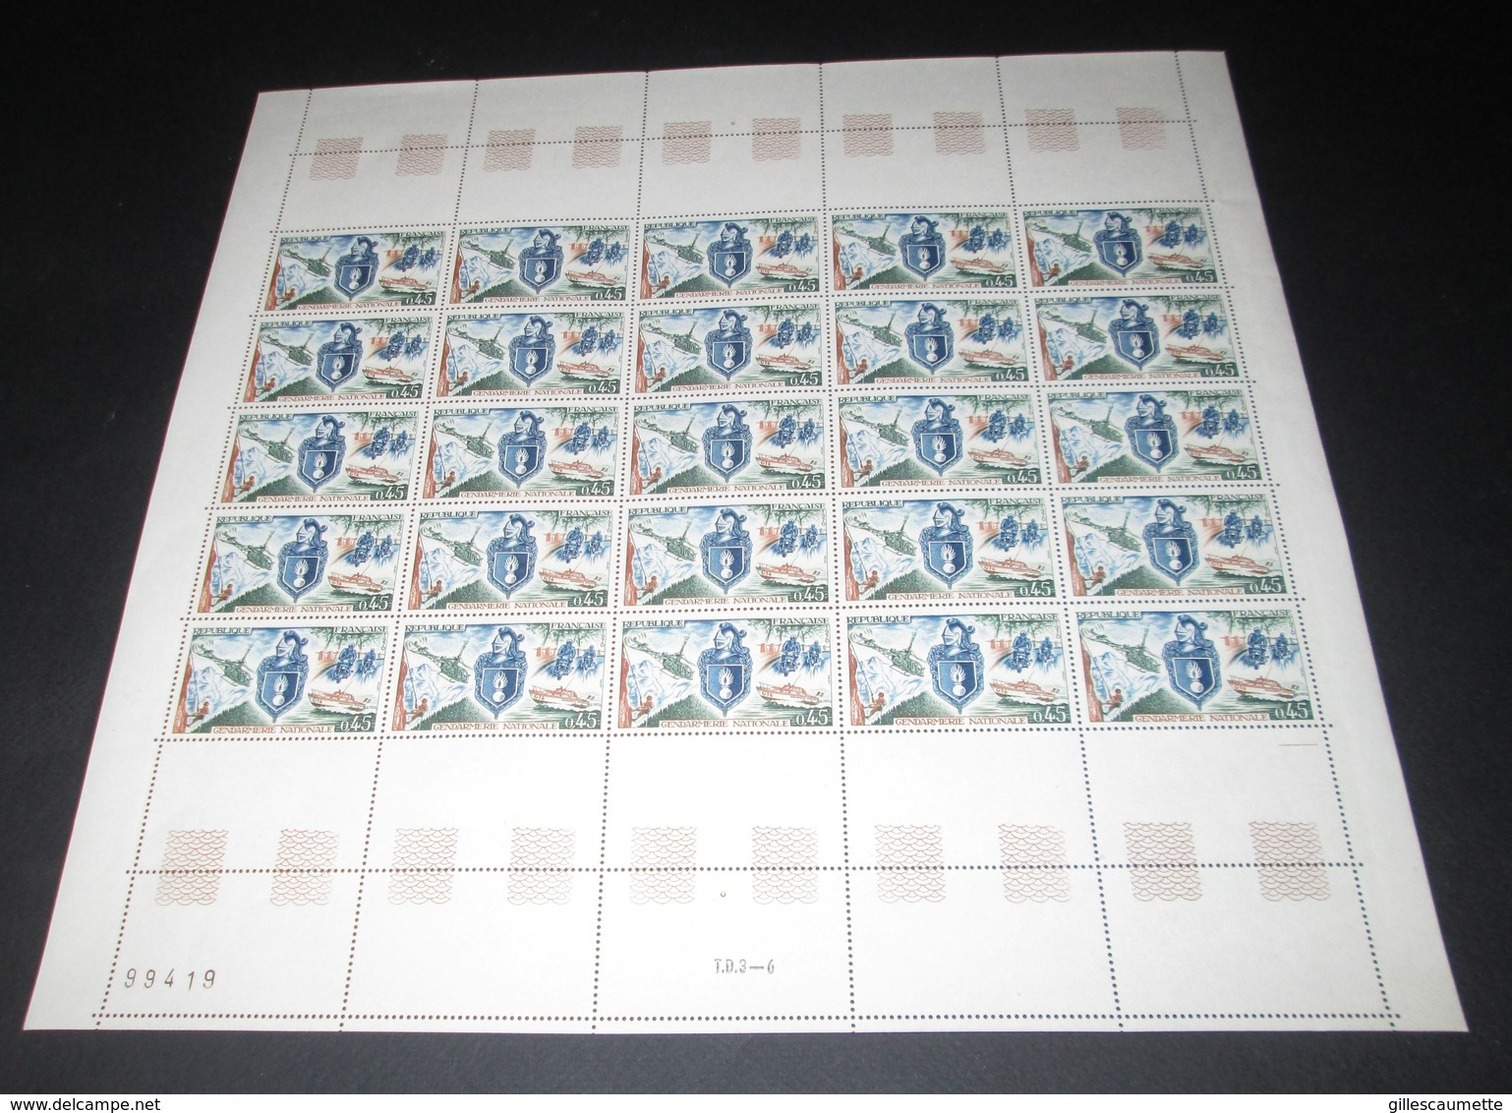 Timbre France Neuf** 1969 N° 1622 GENDARMERIE NATIONALE   FEUILLE COMPLETE - Full Sheets